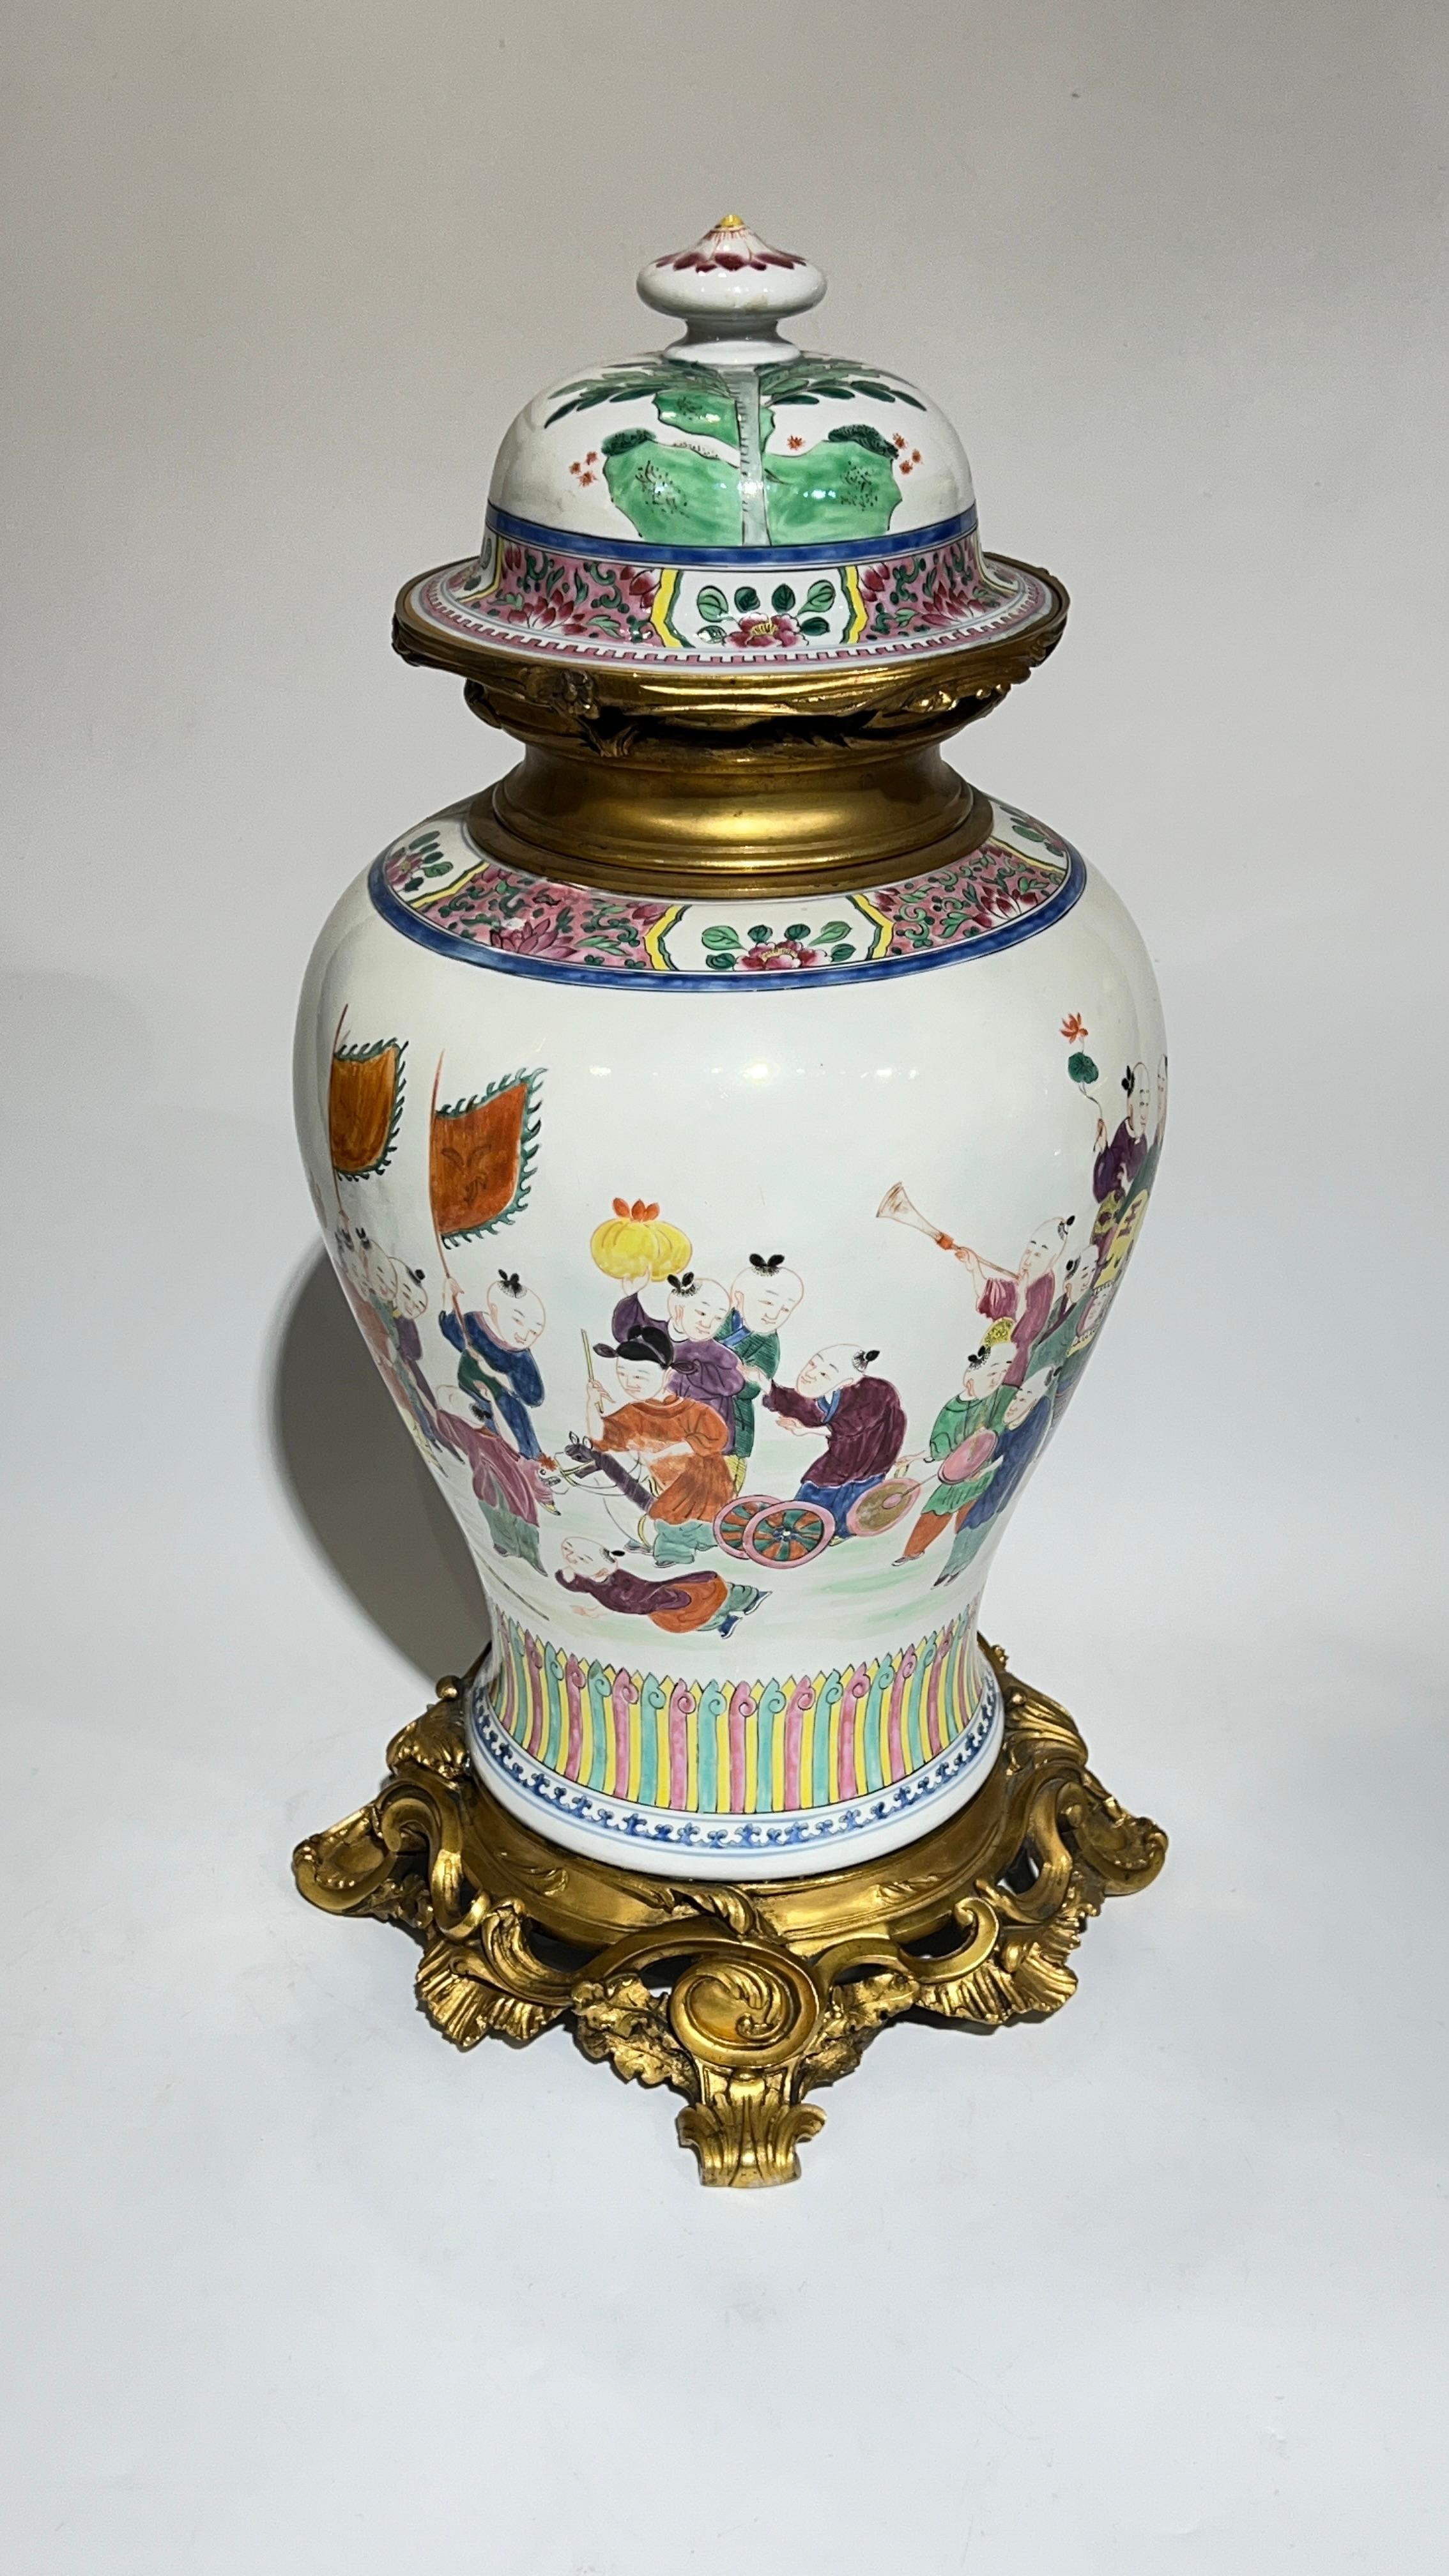 Exceptional 19 century French Gilt Bronze mounted Chinese export vase with cover foliate motifs in the  Louis XV style.